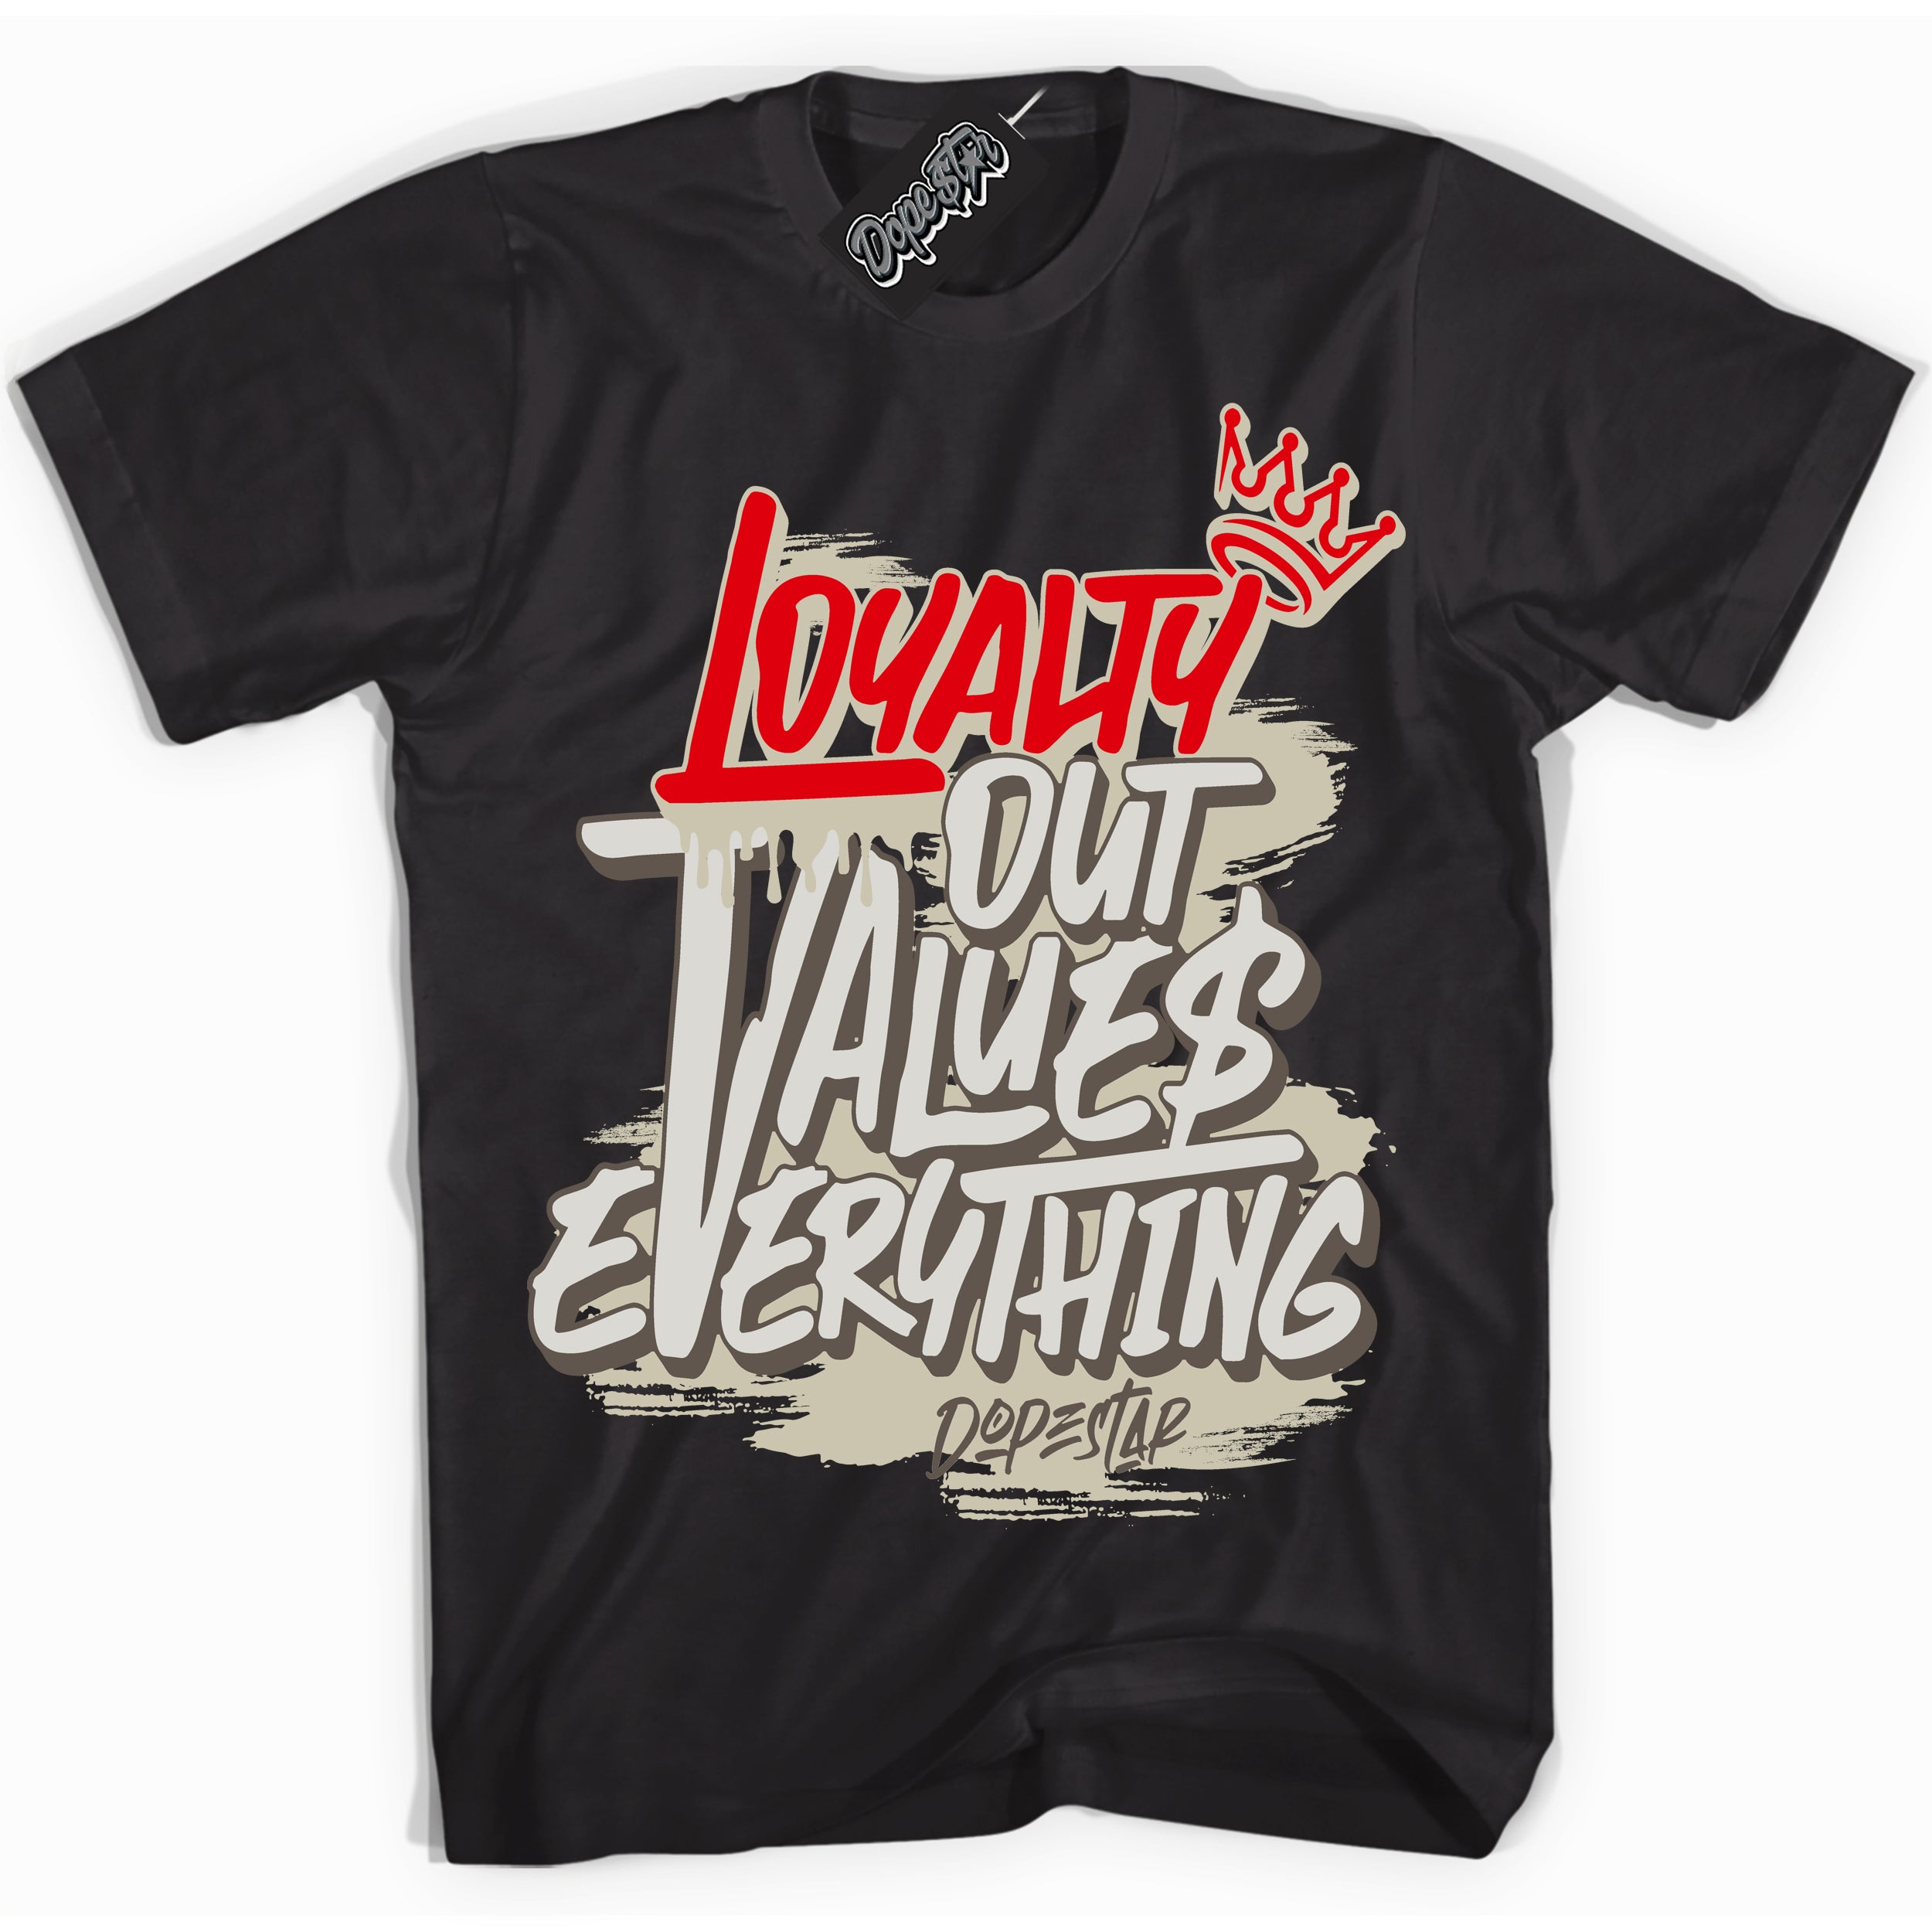 Cool Black Shirt with “ Loyalty Out Values Everything” design that perfectly matches Travis Scott Reverse Mocha 1s Sneakers.